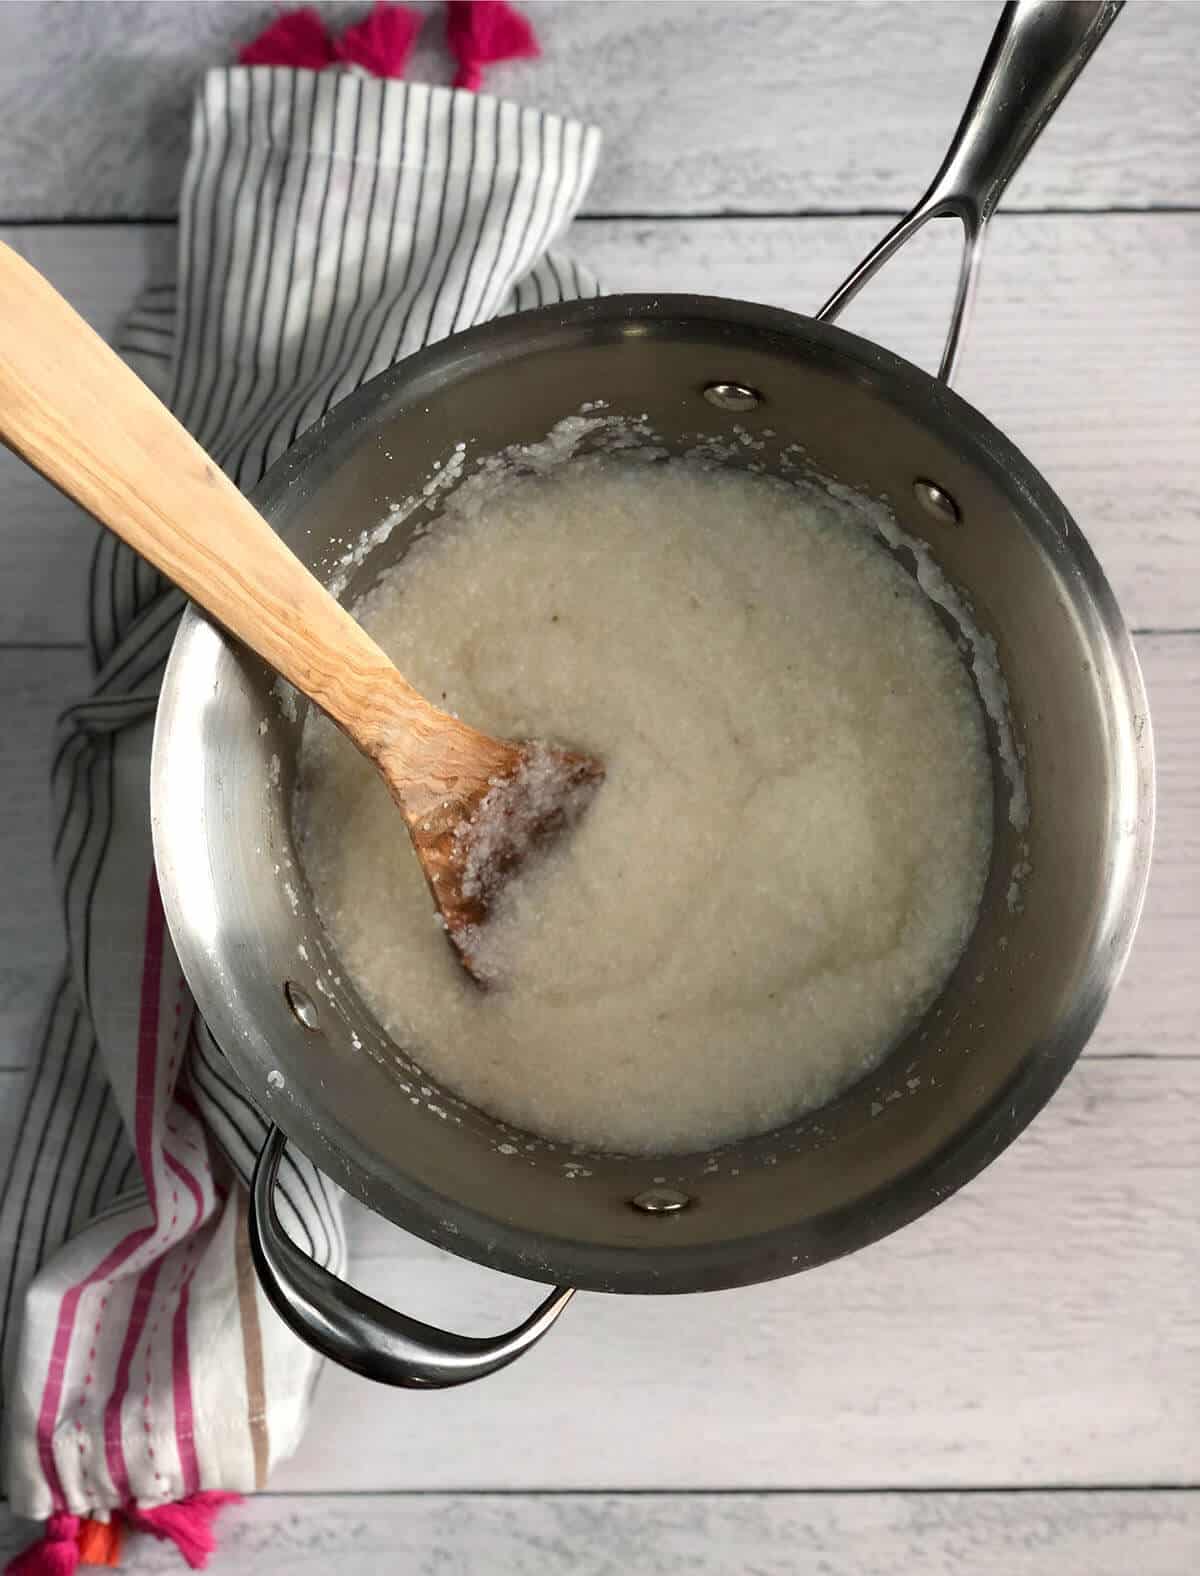 Wooden spoon stirring grits in a pot